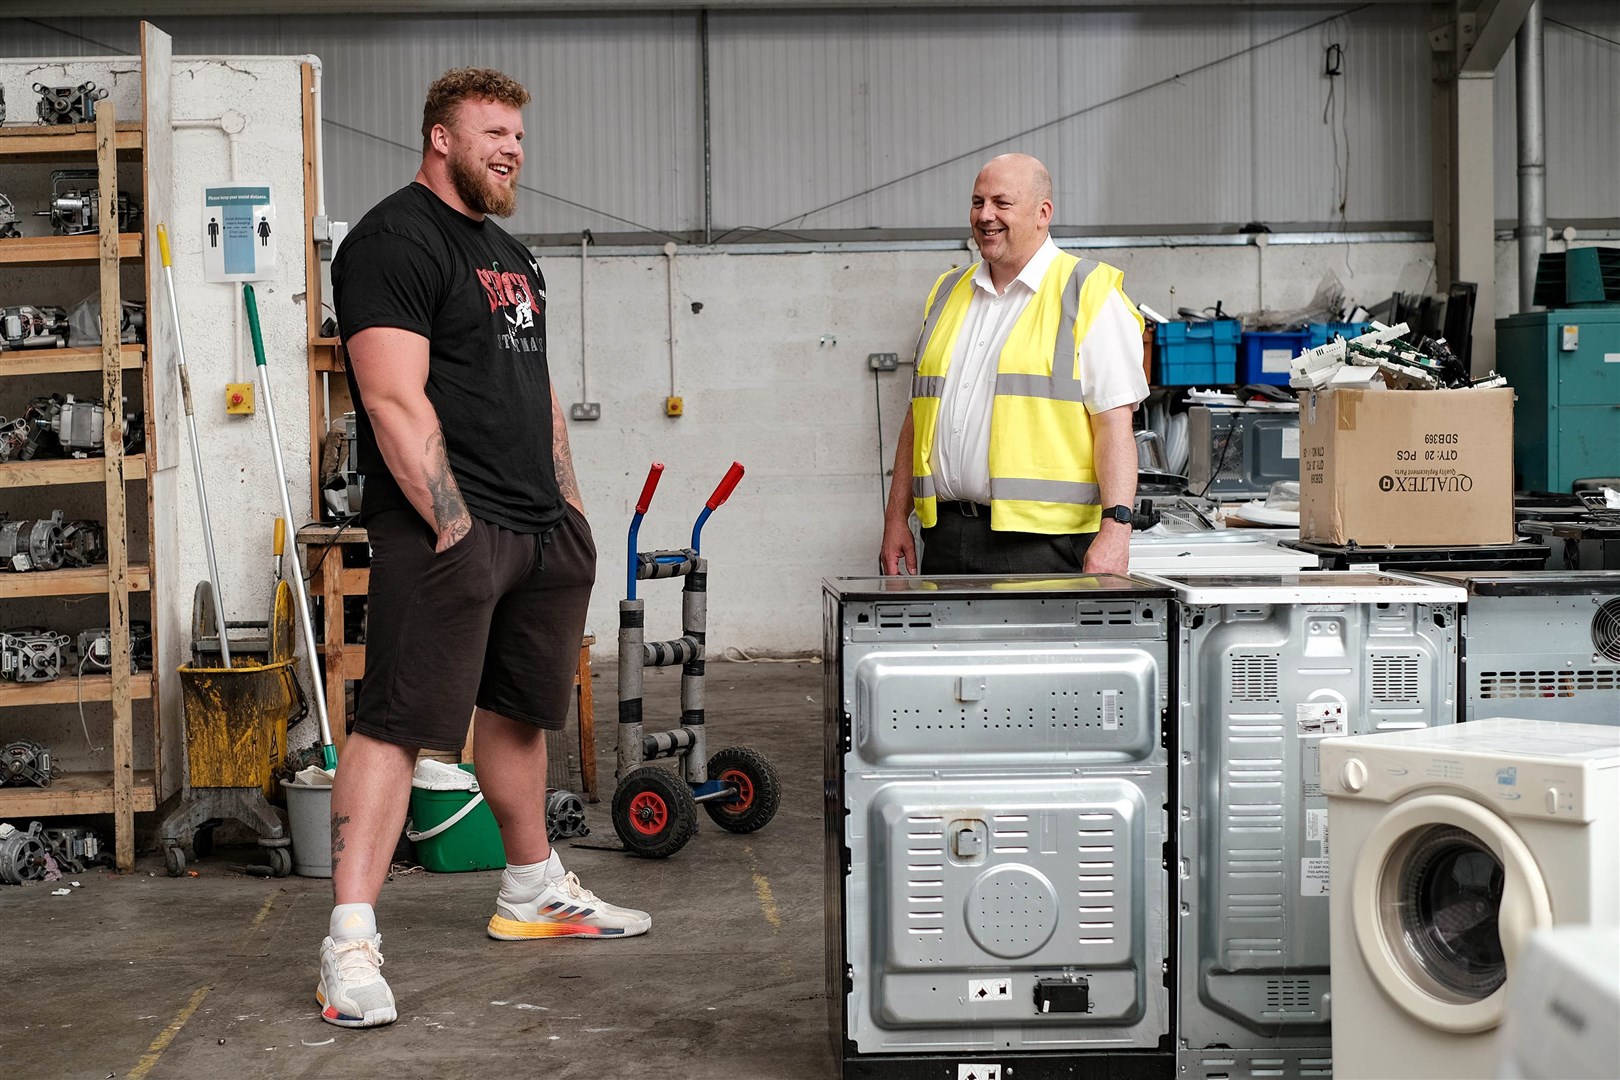 ILM Highland’s Martin MacLeod (right) explains the process of electrical appliance refurbishment to World’s Strongest Man Tom Stoltman.